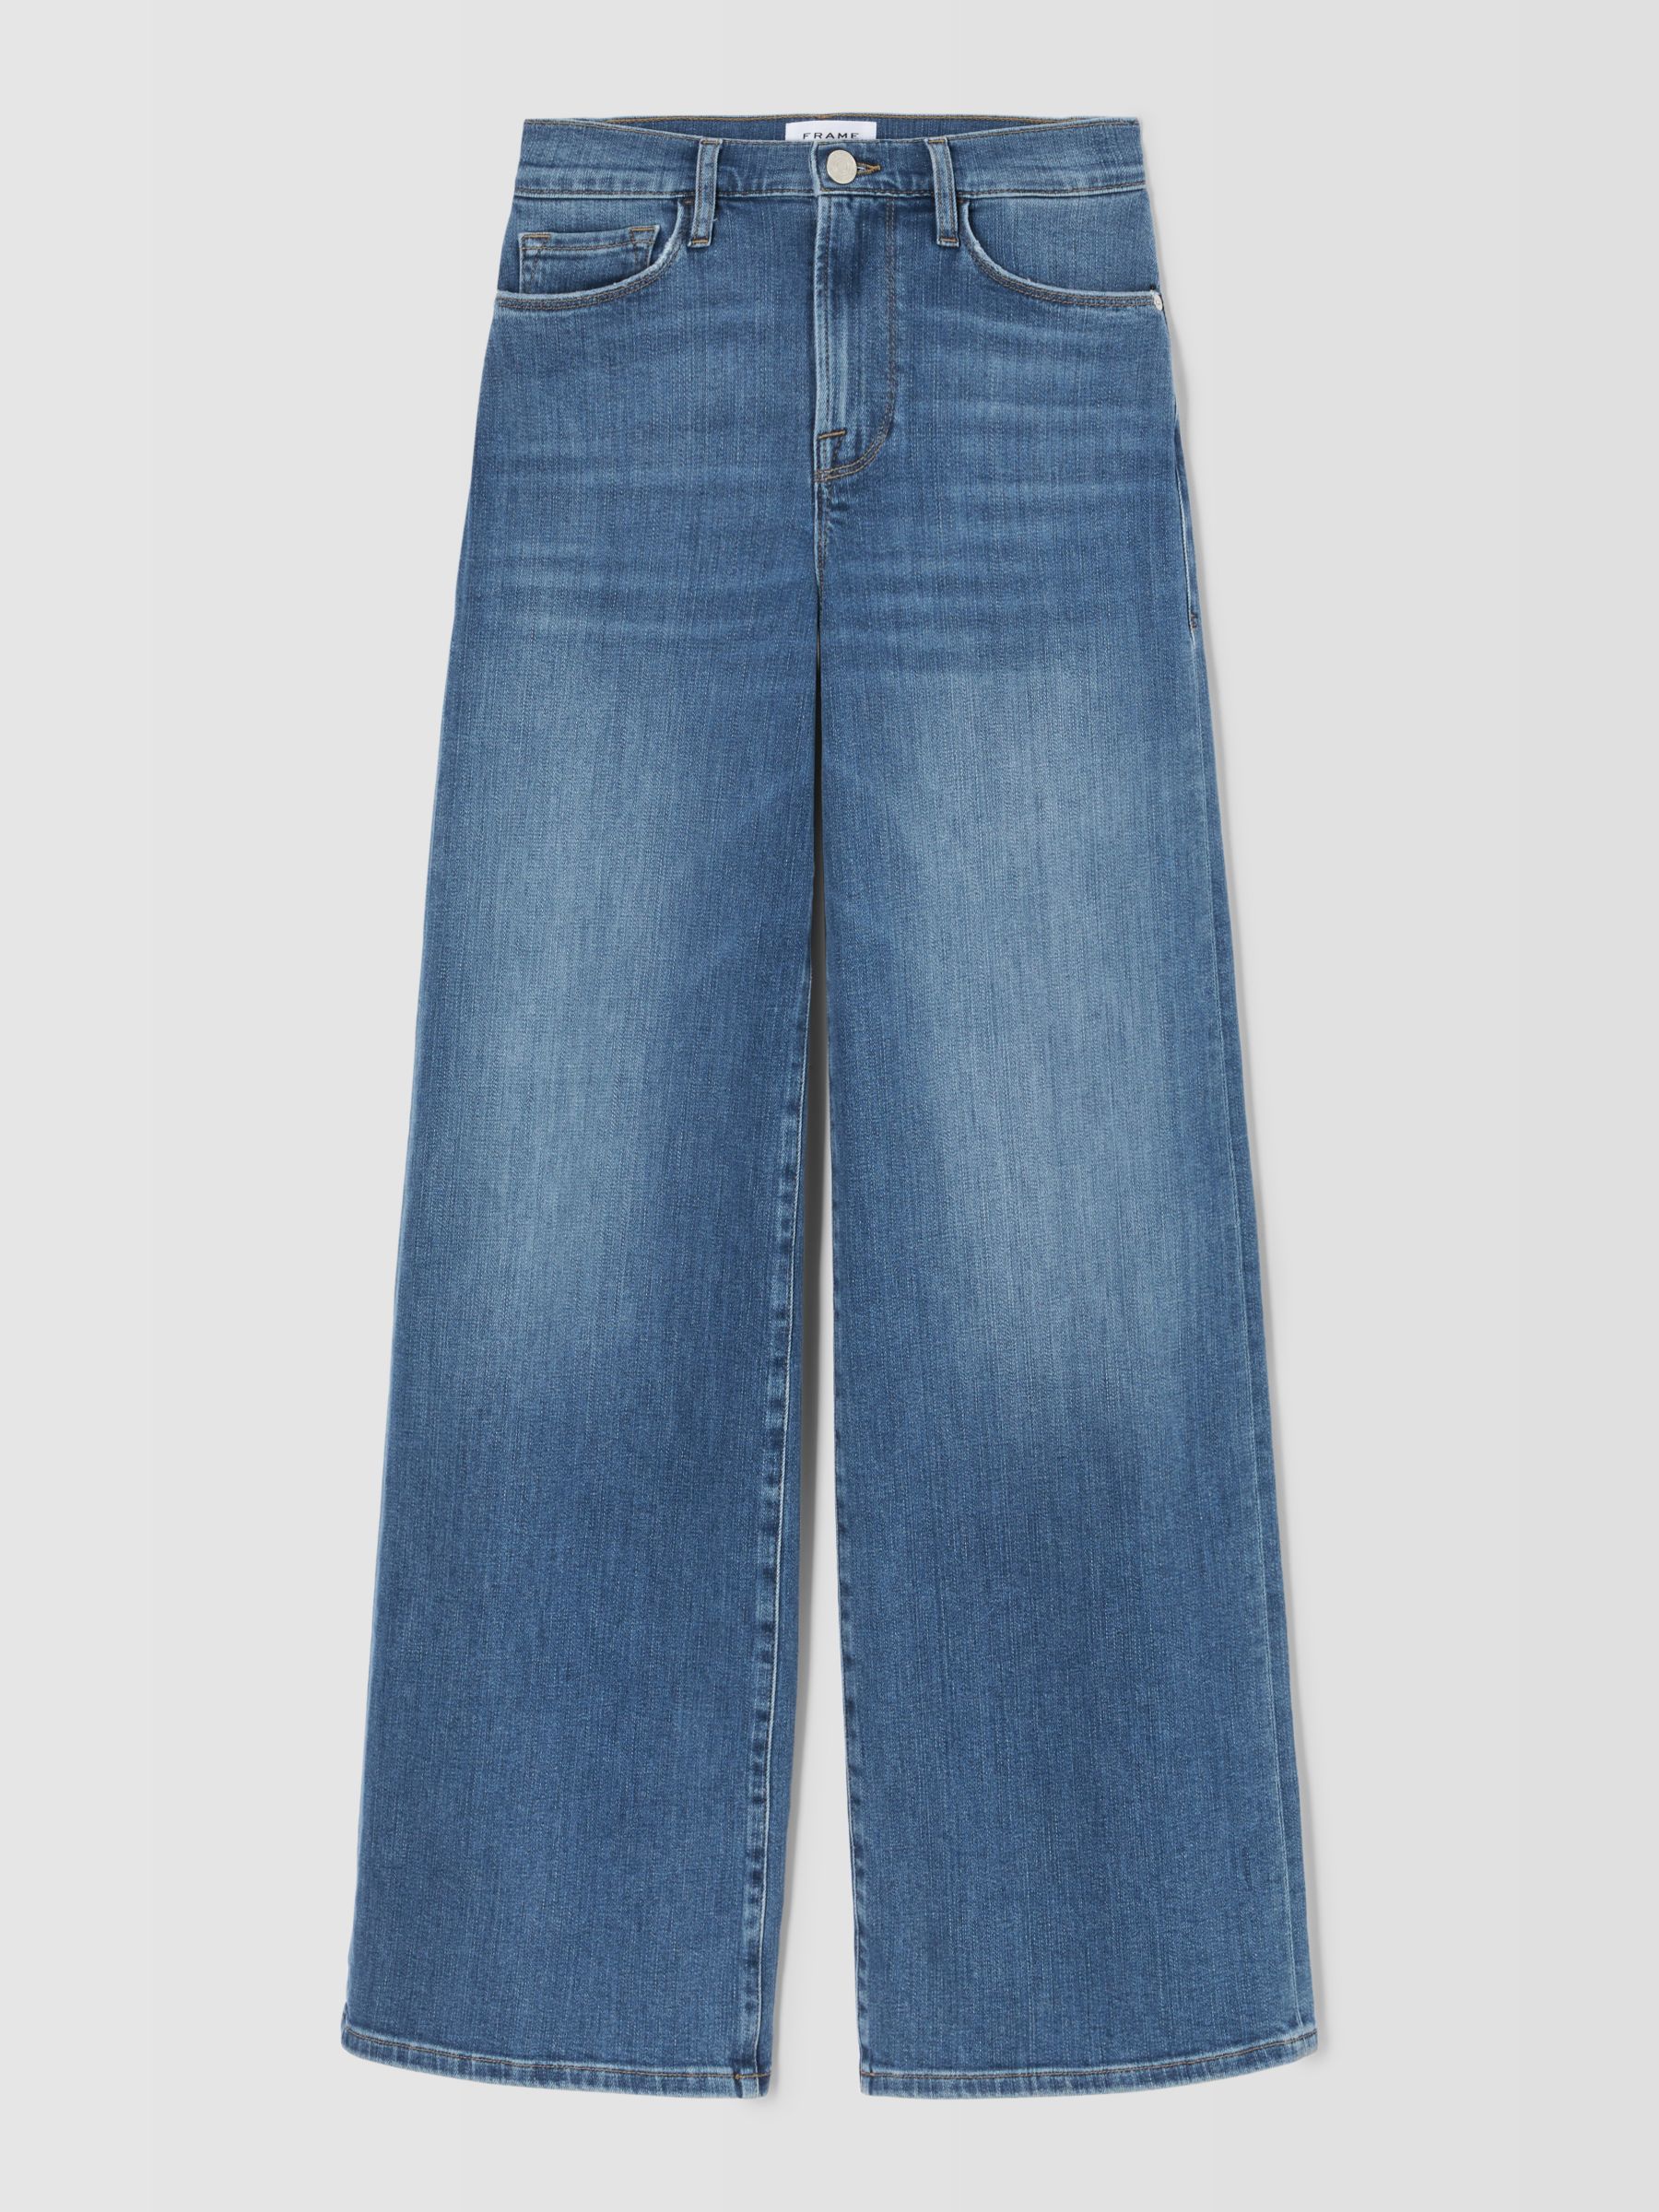 Buy FRAME Le Slim Palazzo Wide Leg Flare Jeans, Drizzle Online at johnlewis.com